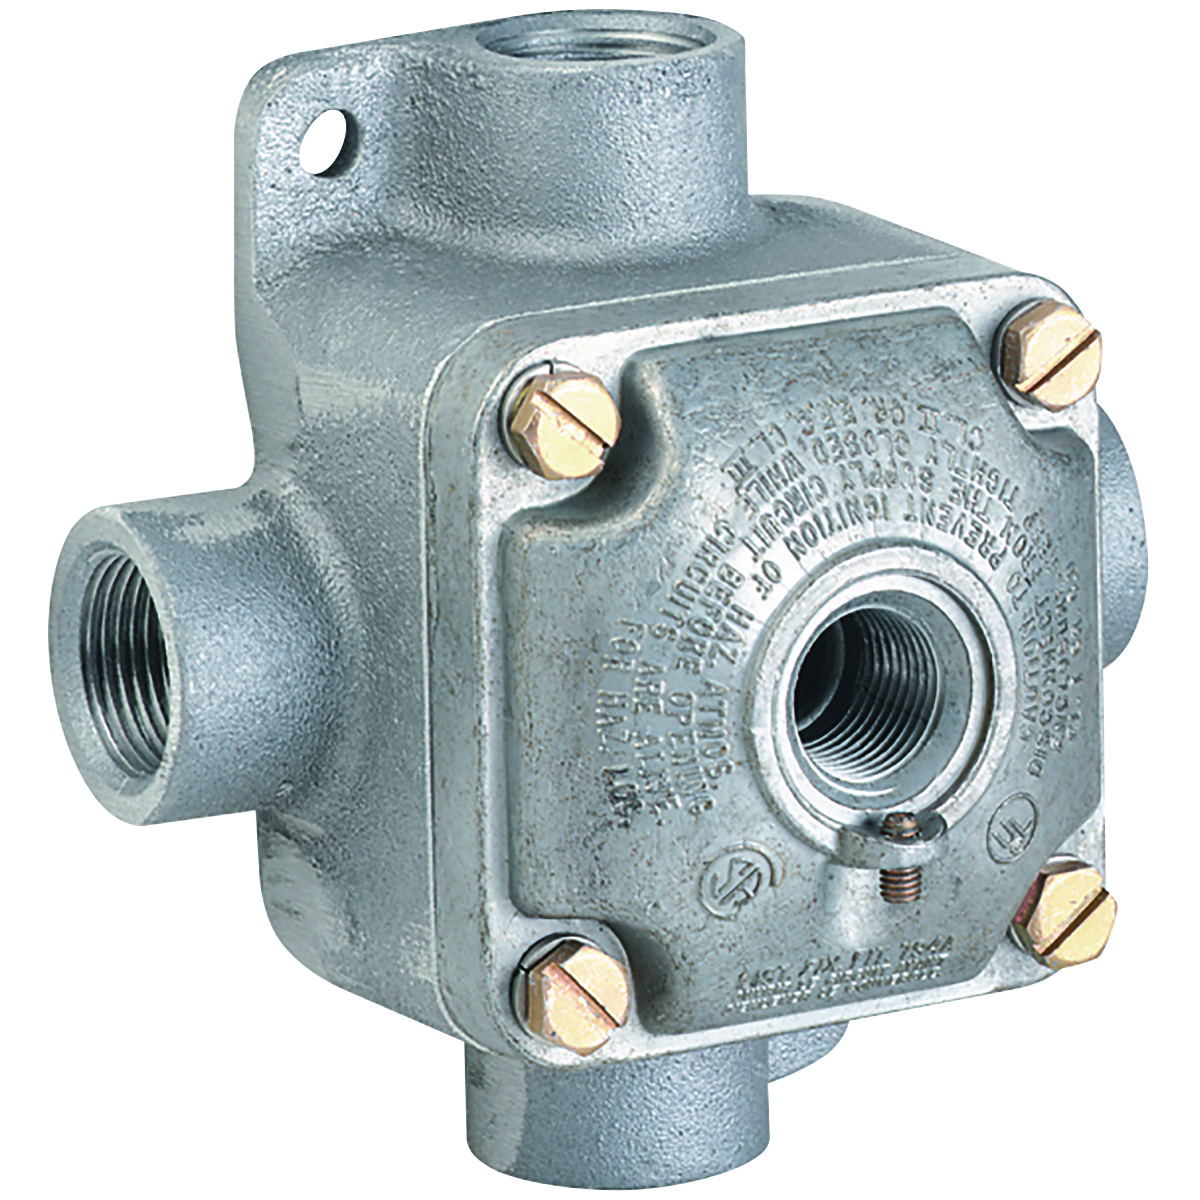 JL SERIES - ALUMINUM OUTLET BODY WITH COVER - WITH HUB COVER - BOX TYPEX - BOX HUB SIZE 1/2 INCH - COVER HUB SIZE 1/2 INCH